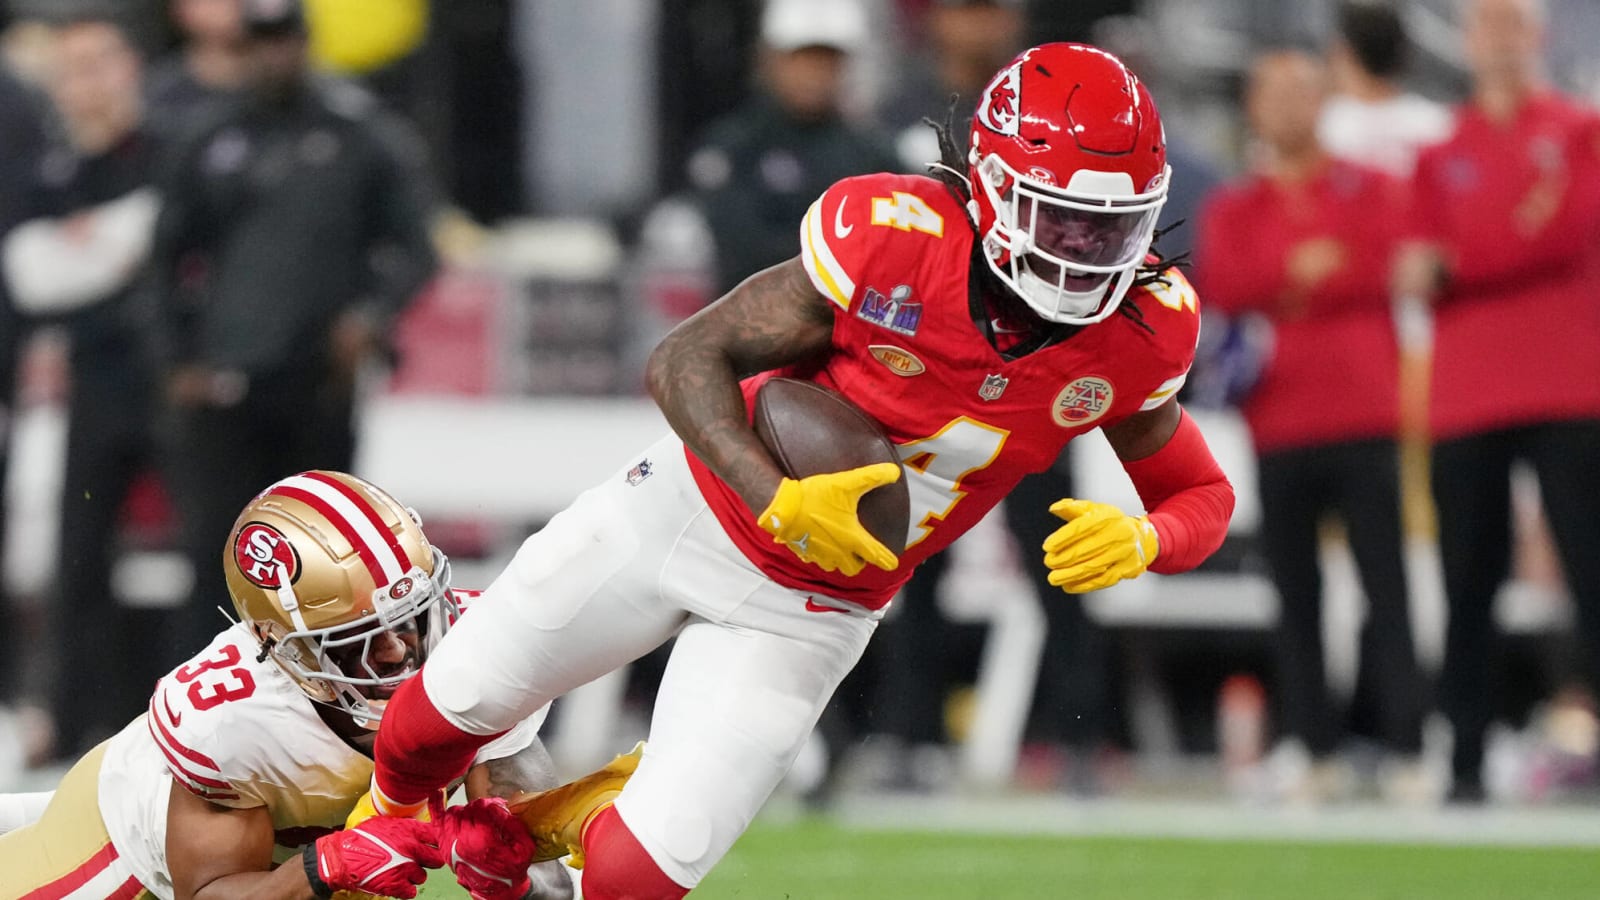 Rashee Rice set to participate in all of Chiefs’ offseason activities amid legal trouble over Dallas car crash involvement